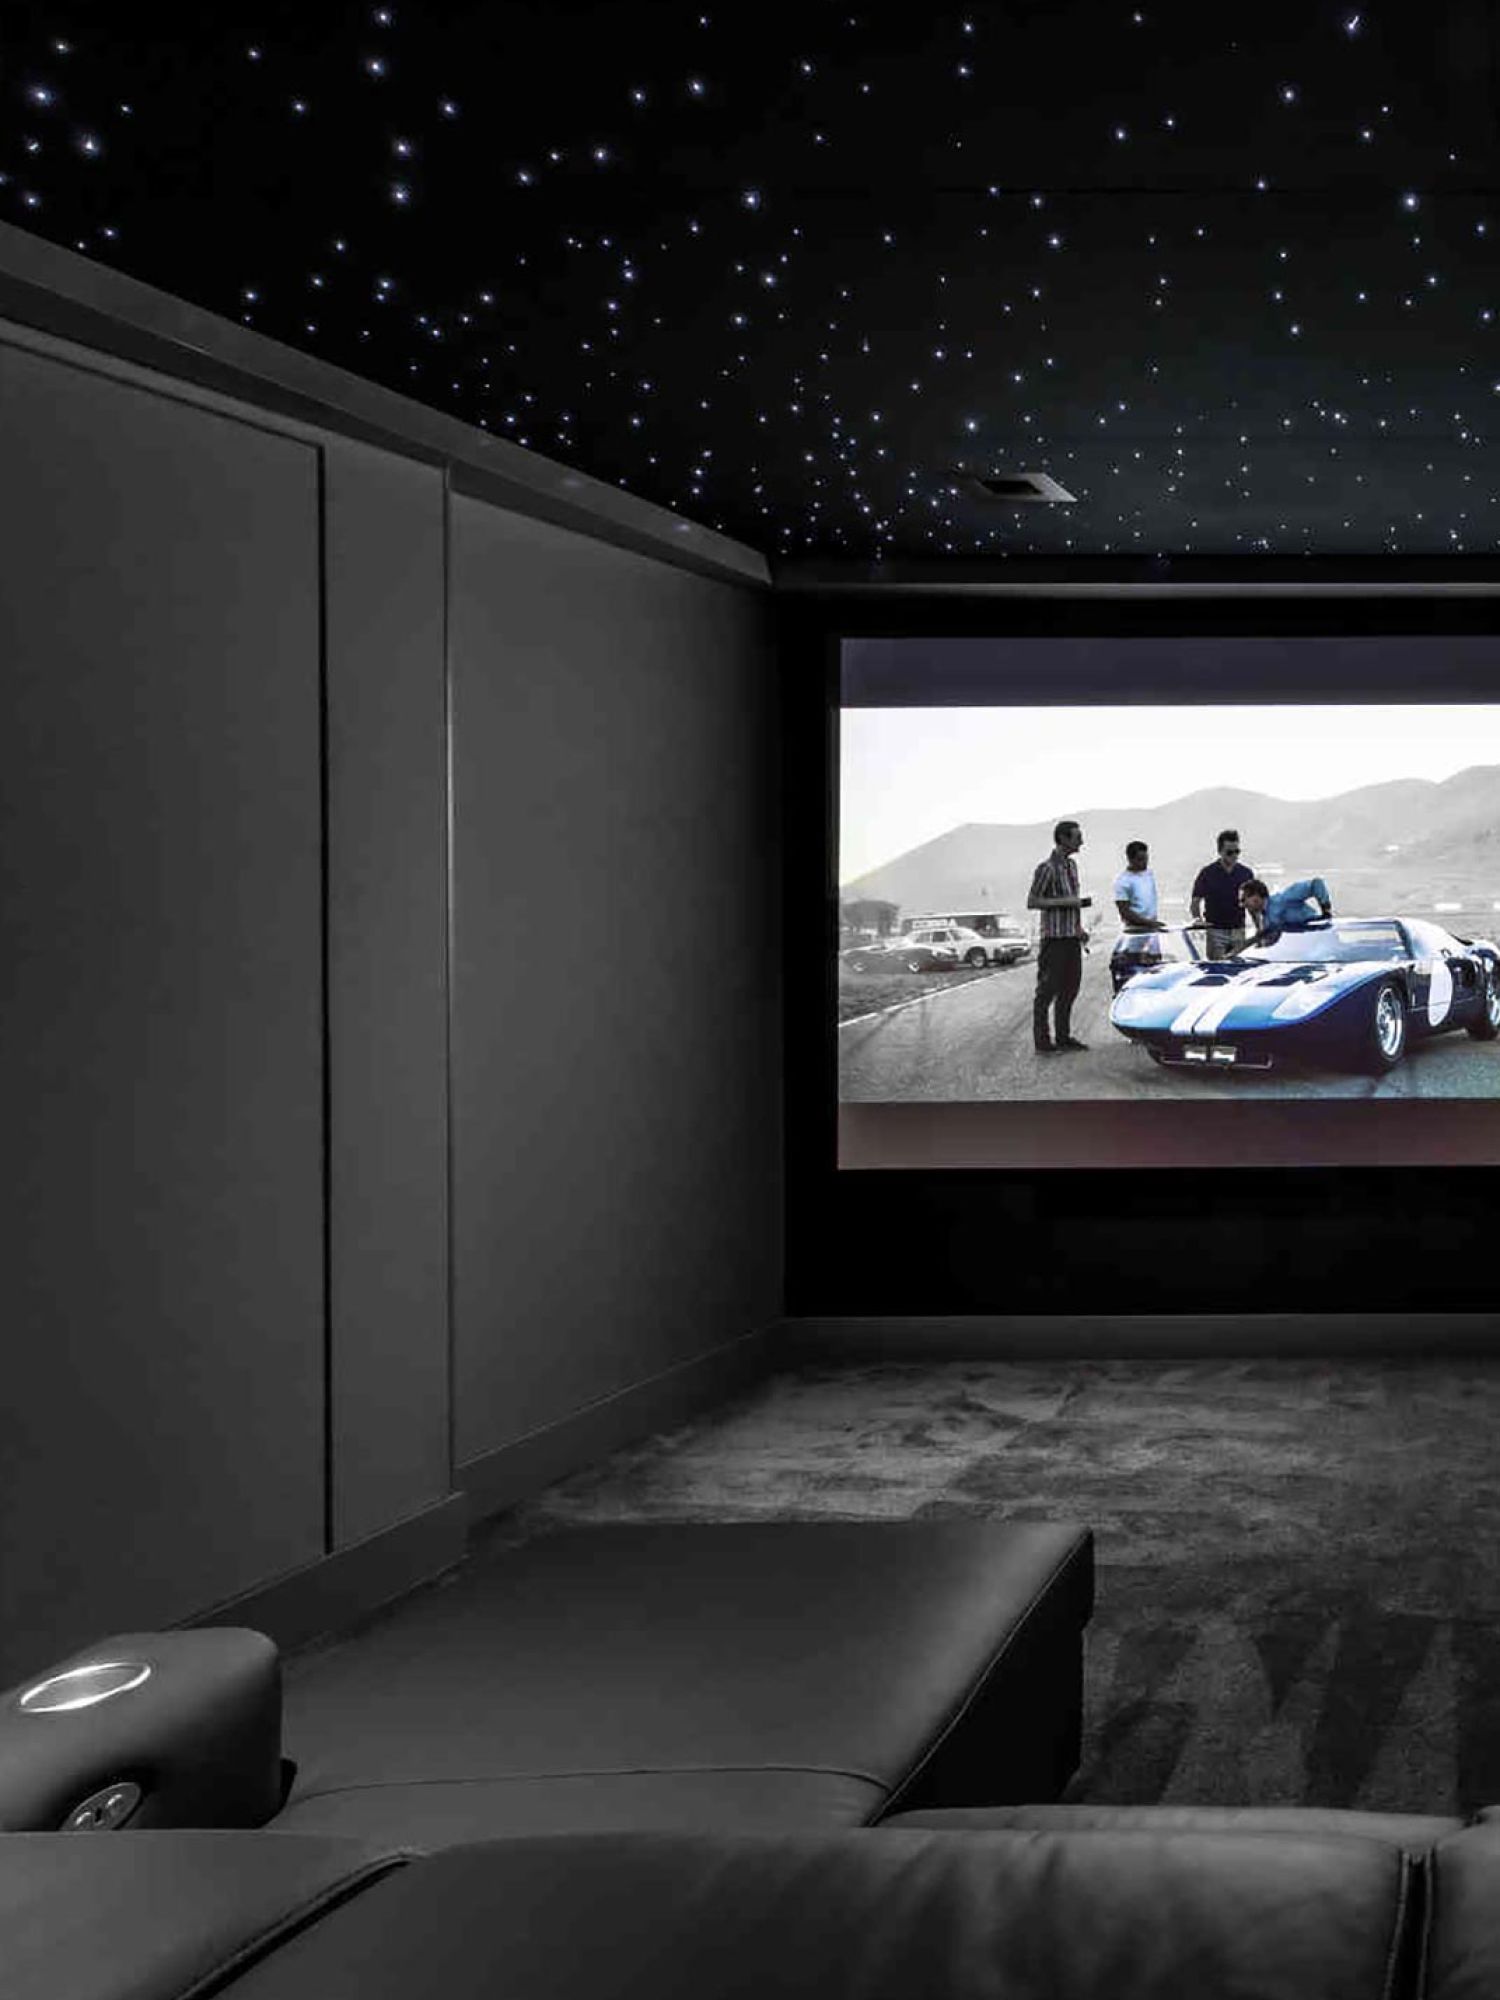 Dedicated custom home theater design with theater seating and starlight ceiling